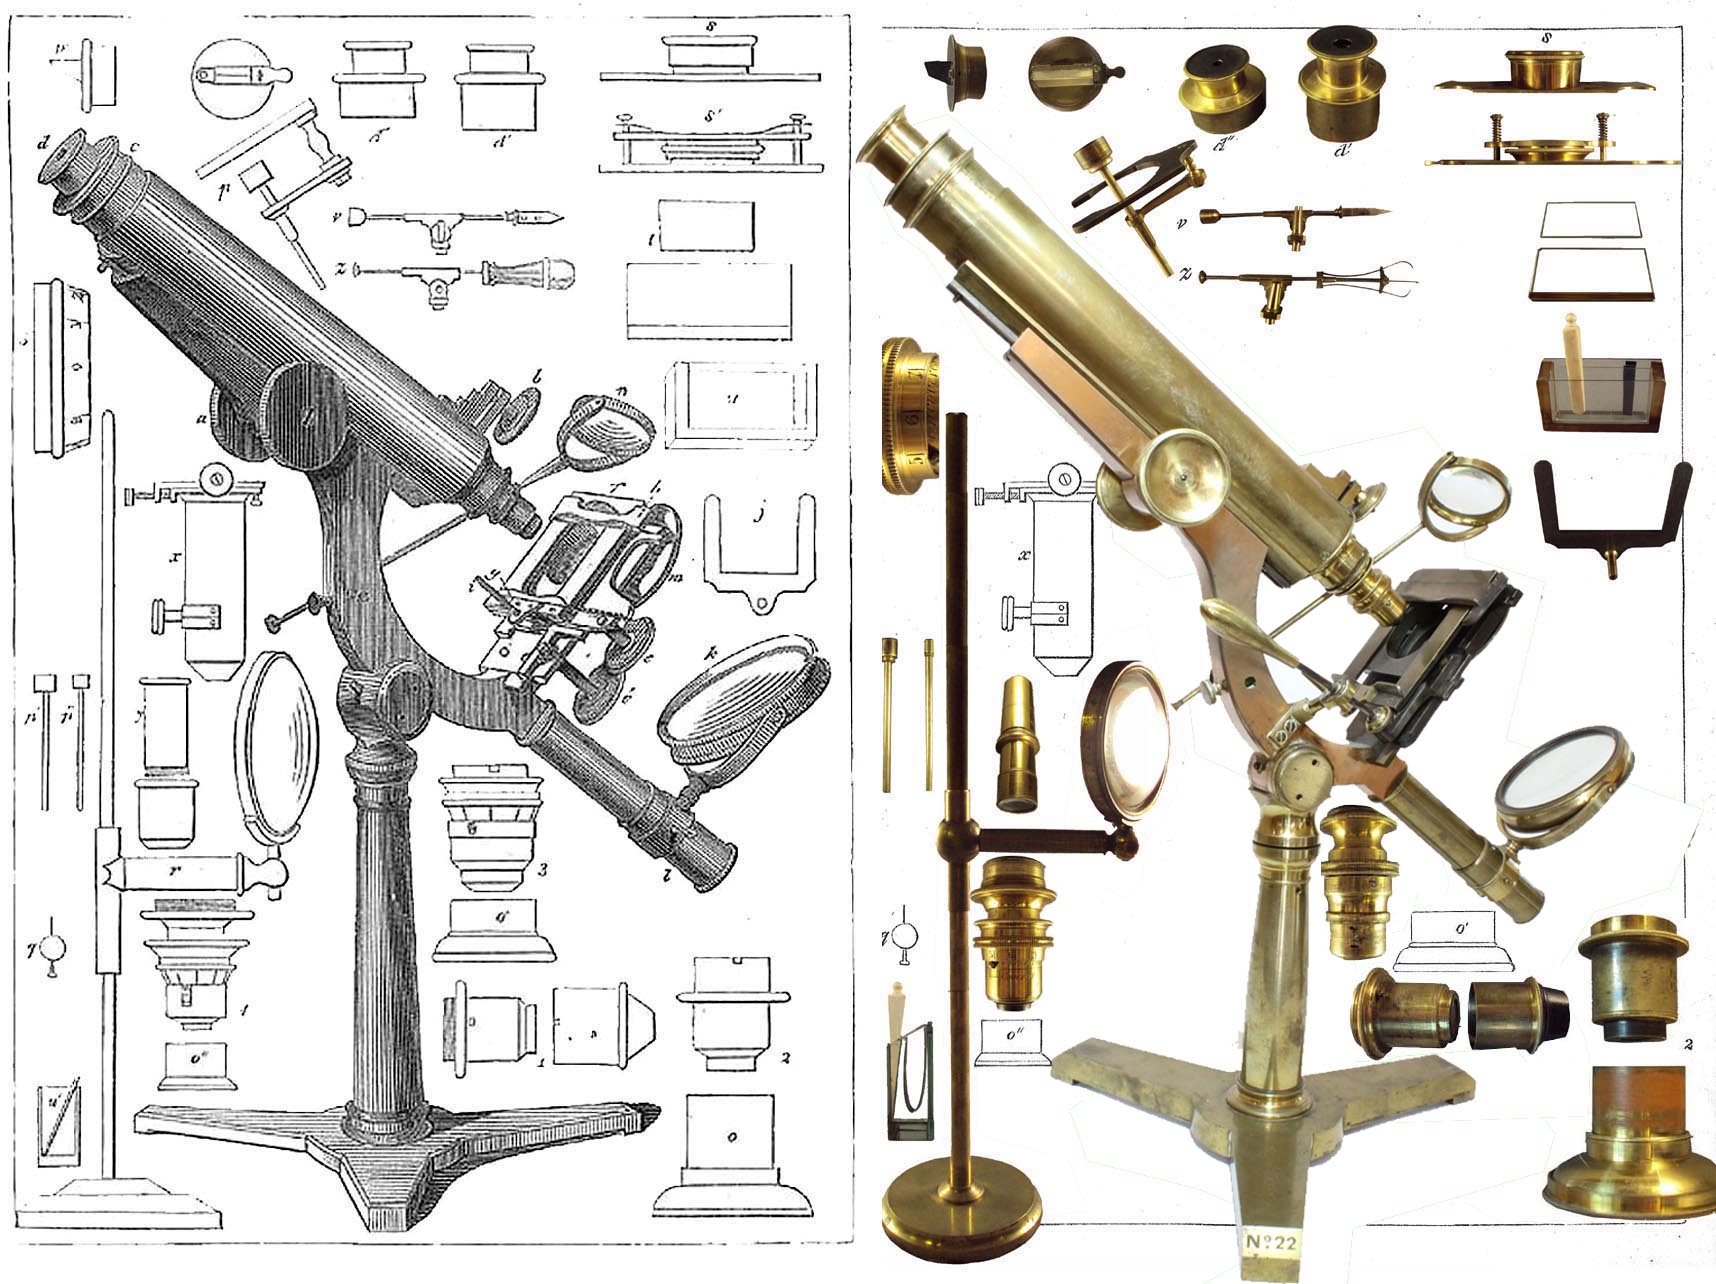 James Smith's Microscope and Accessories